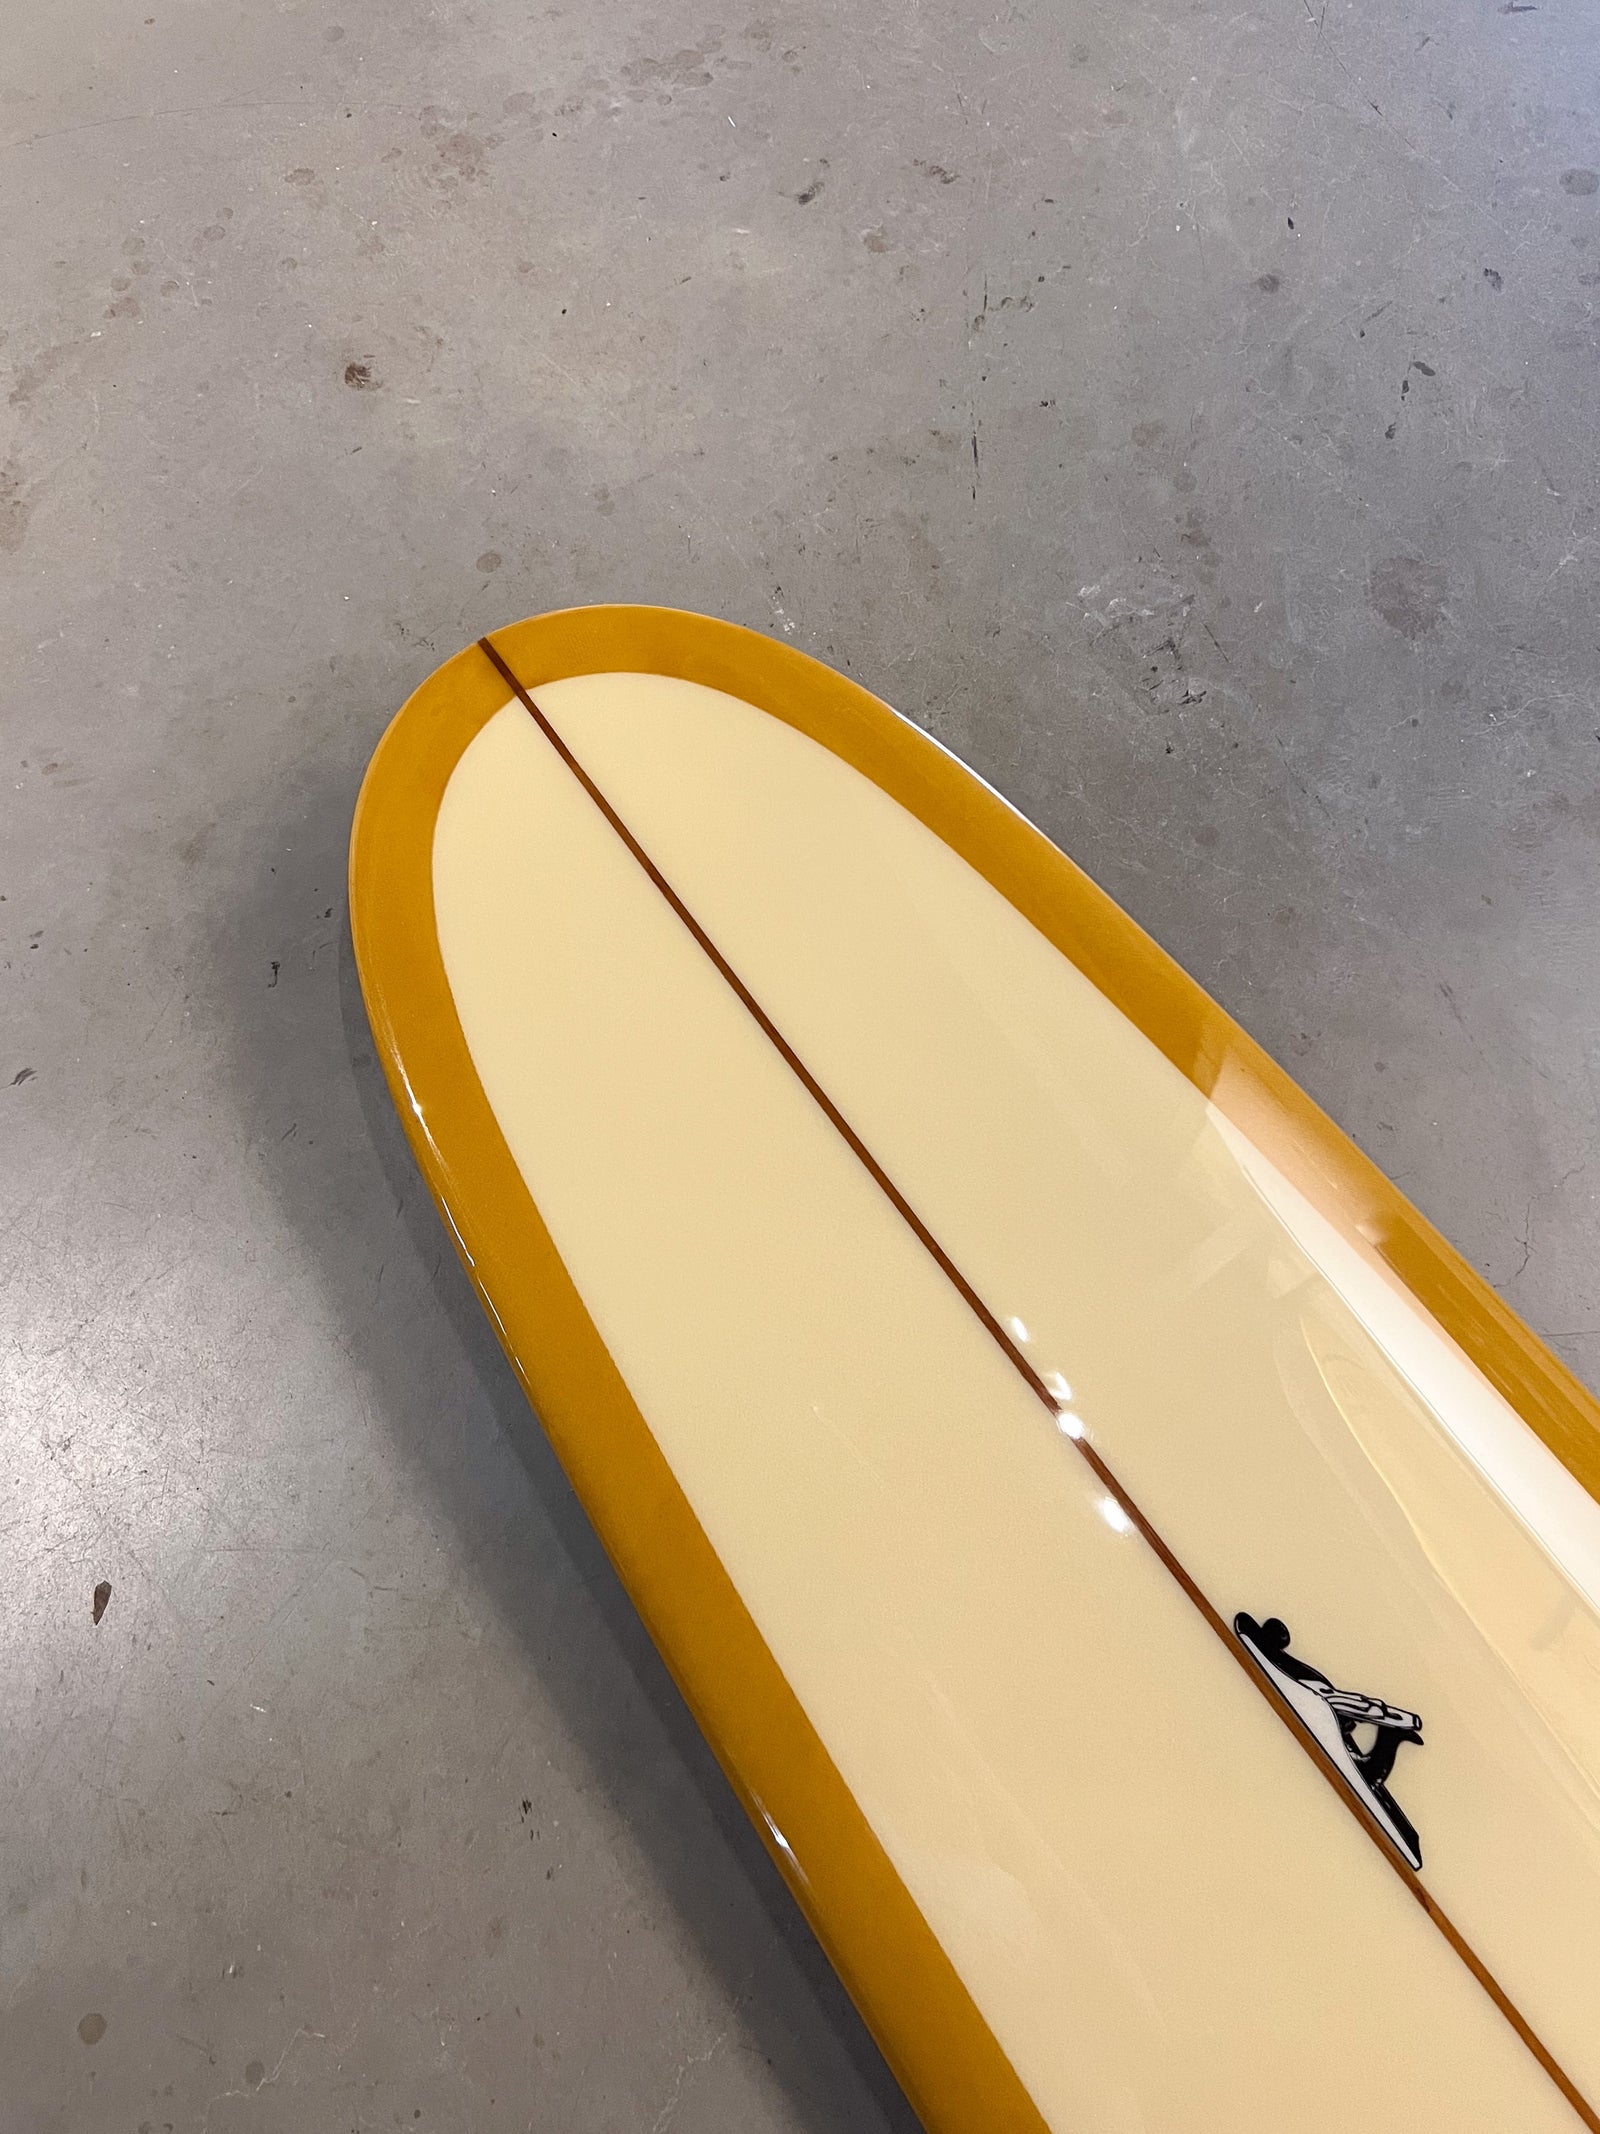 9'9" Scoop Tail #7359